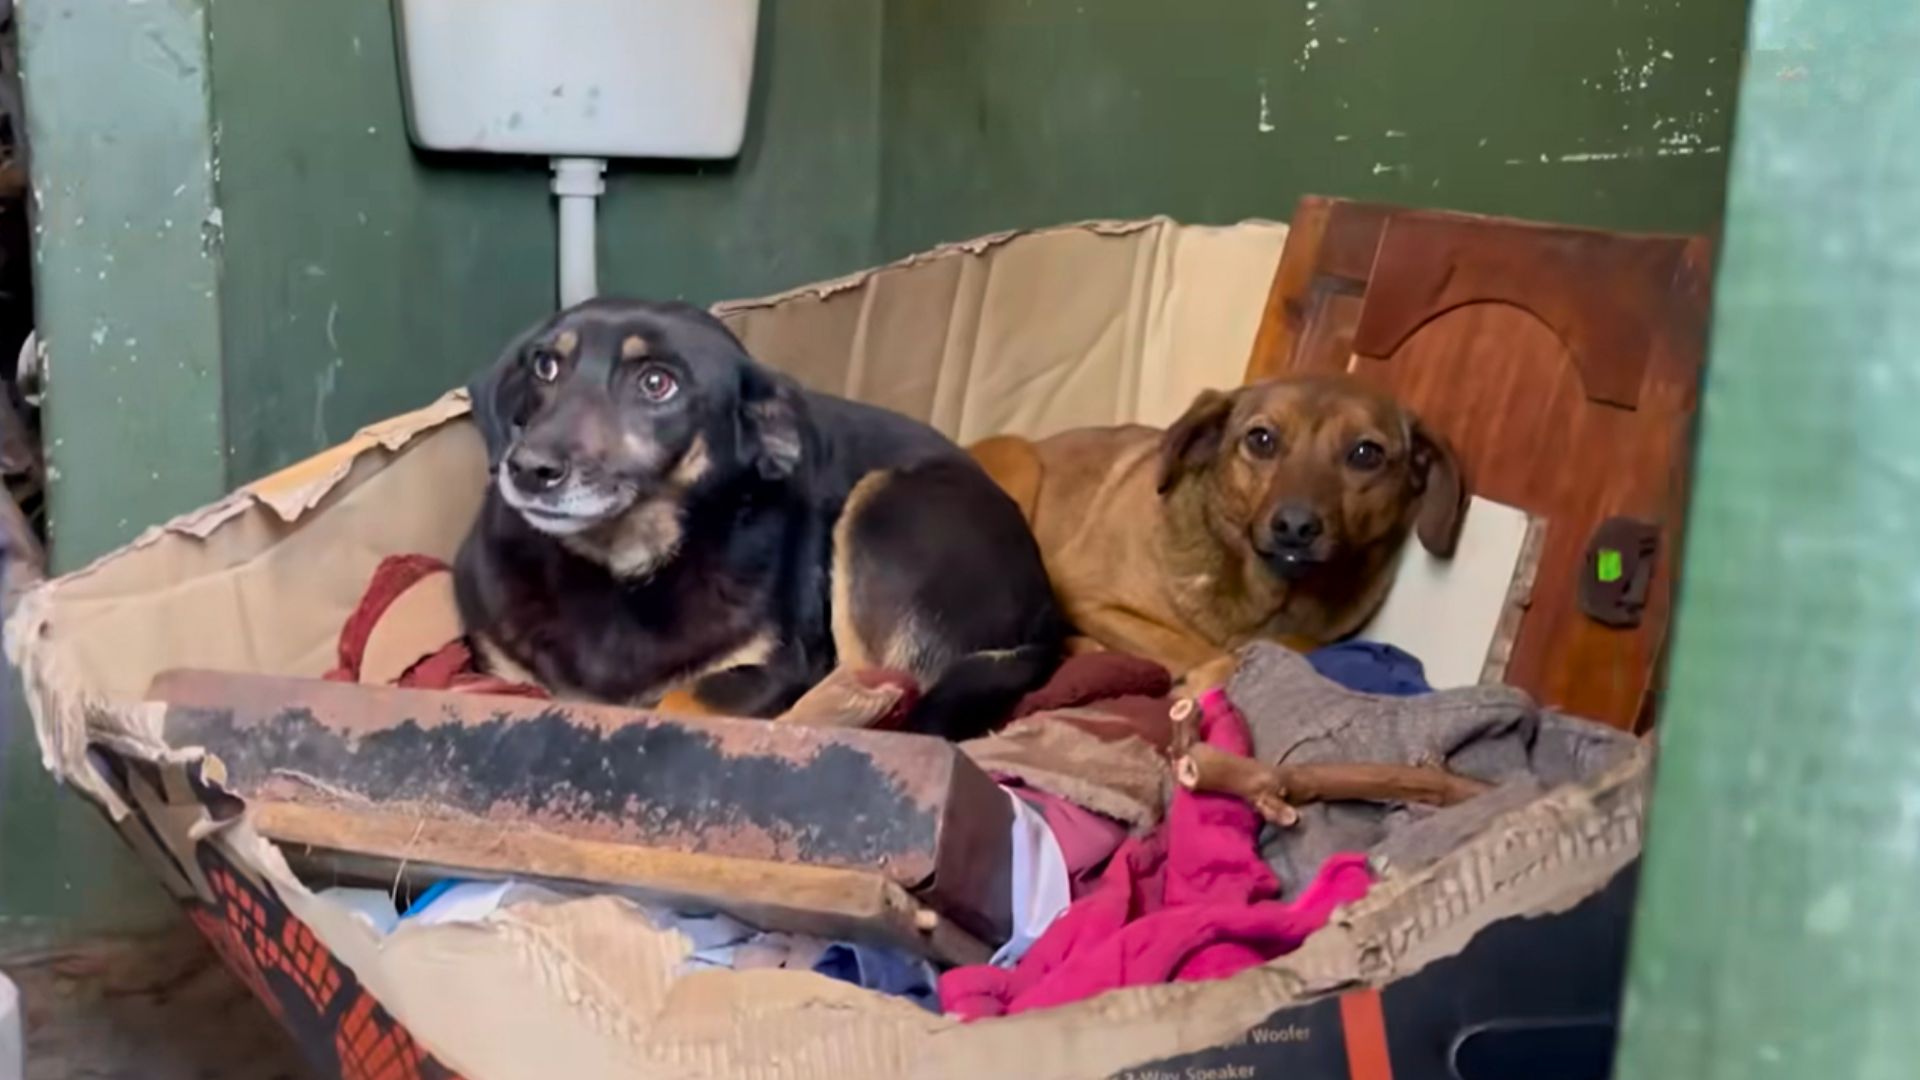 Rescuers Were Surprised To Find Two Frightened Dog Siblings Hiding In An Outdoor Bathroom